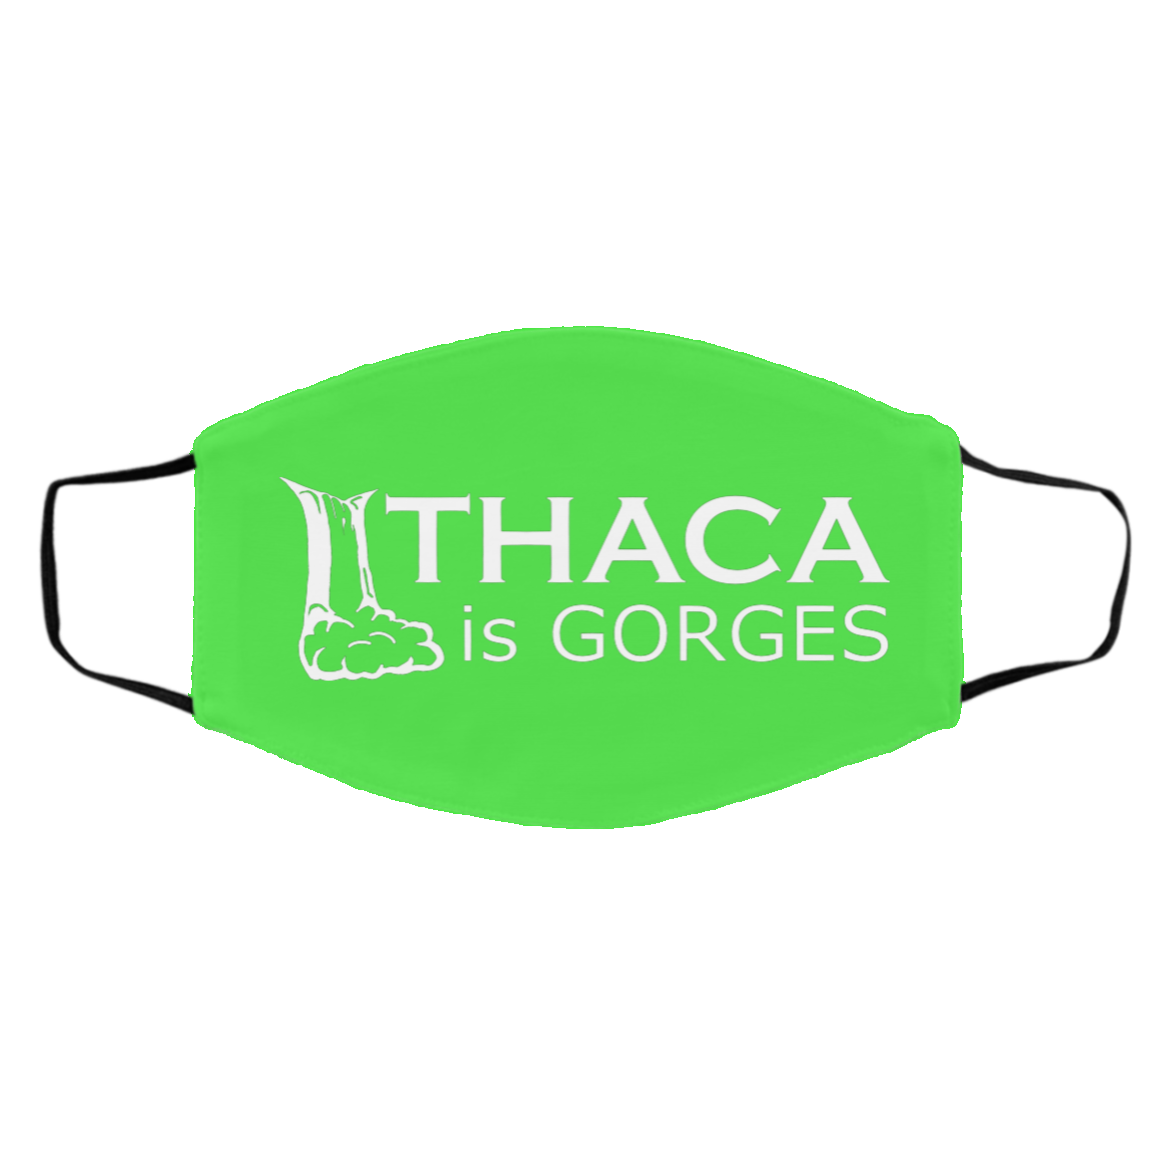 Ithaca Is Gorges - Med/Lg Face Mask (White Graphic)